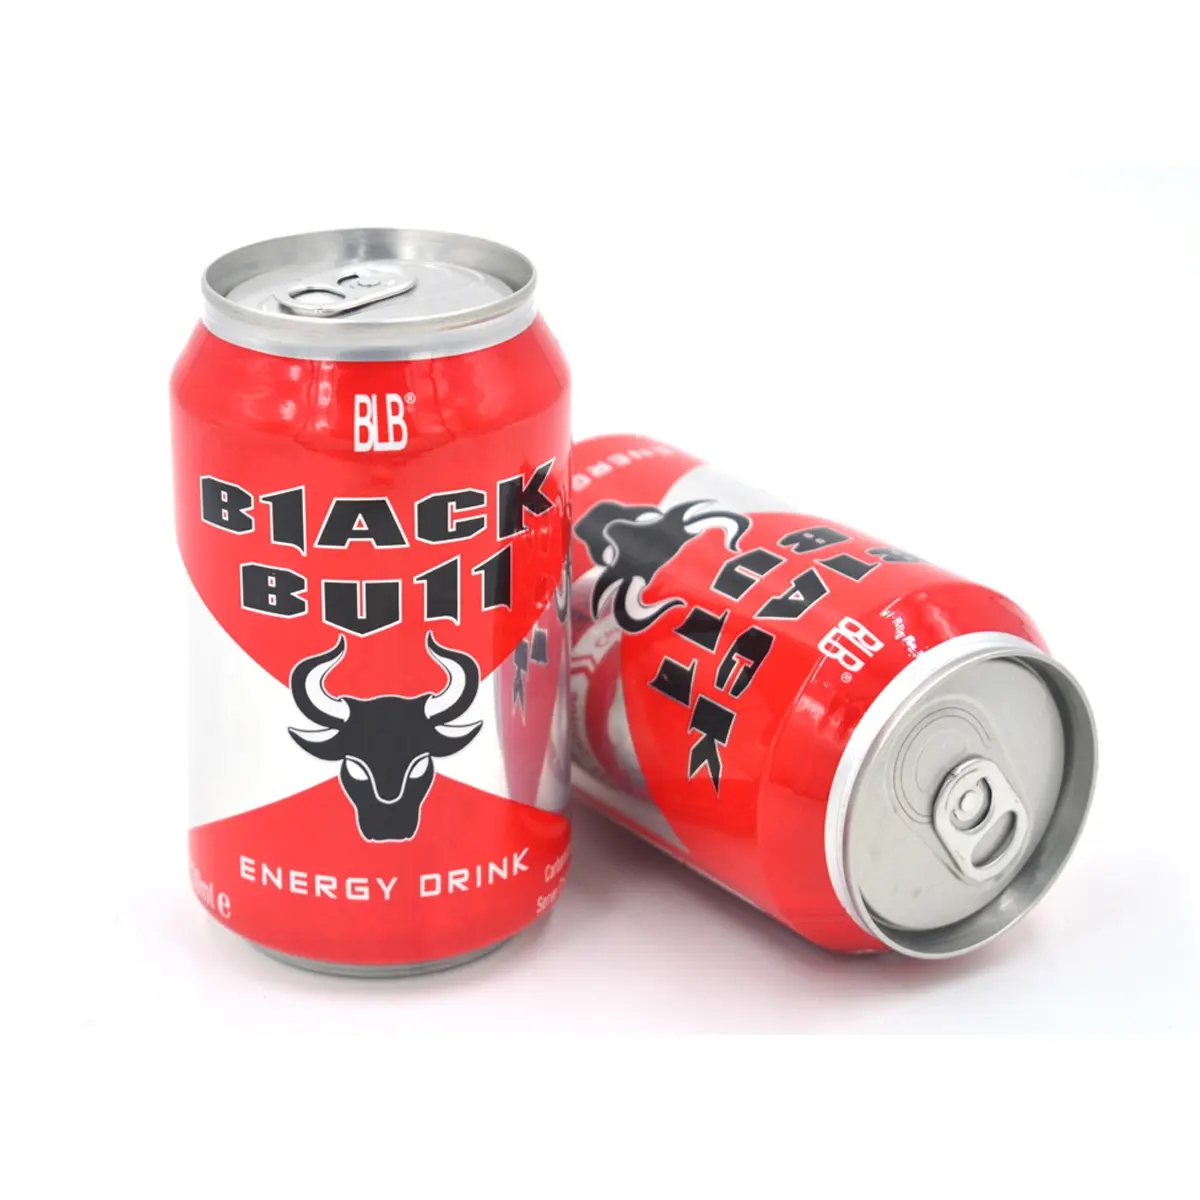 Cheap Price 330mL Canned BLB Black Bull Energy Drink with Carbonate